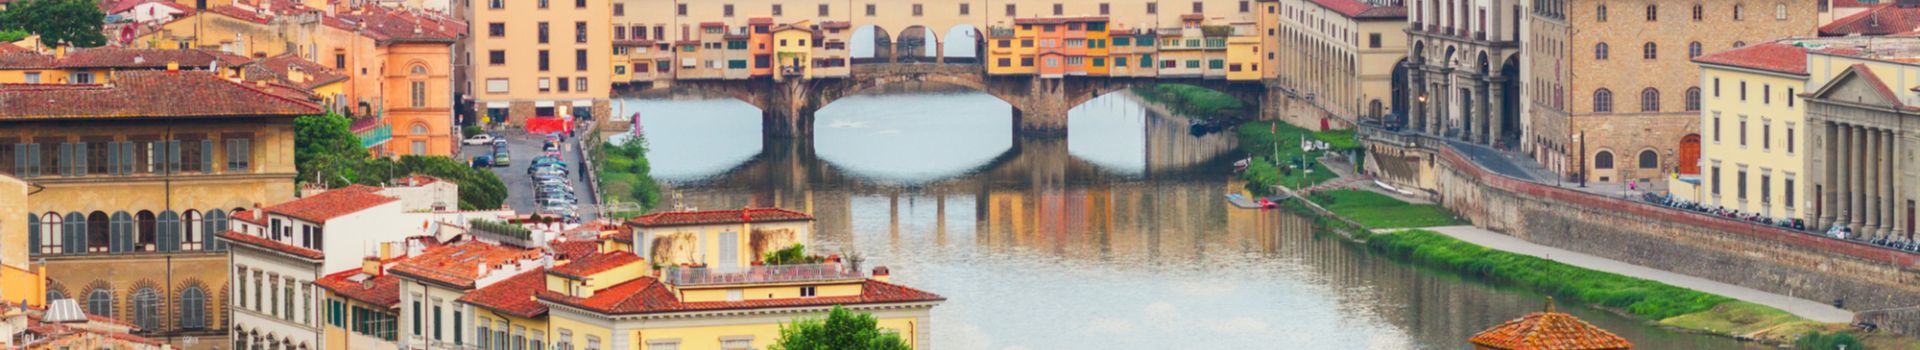 Holidays to Florence | Book Flights & Hotel | Cassidy Travel